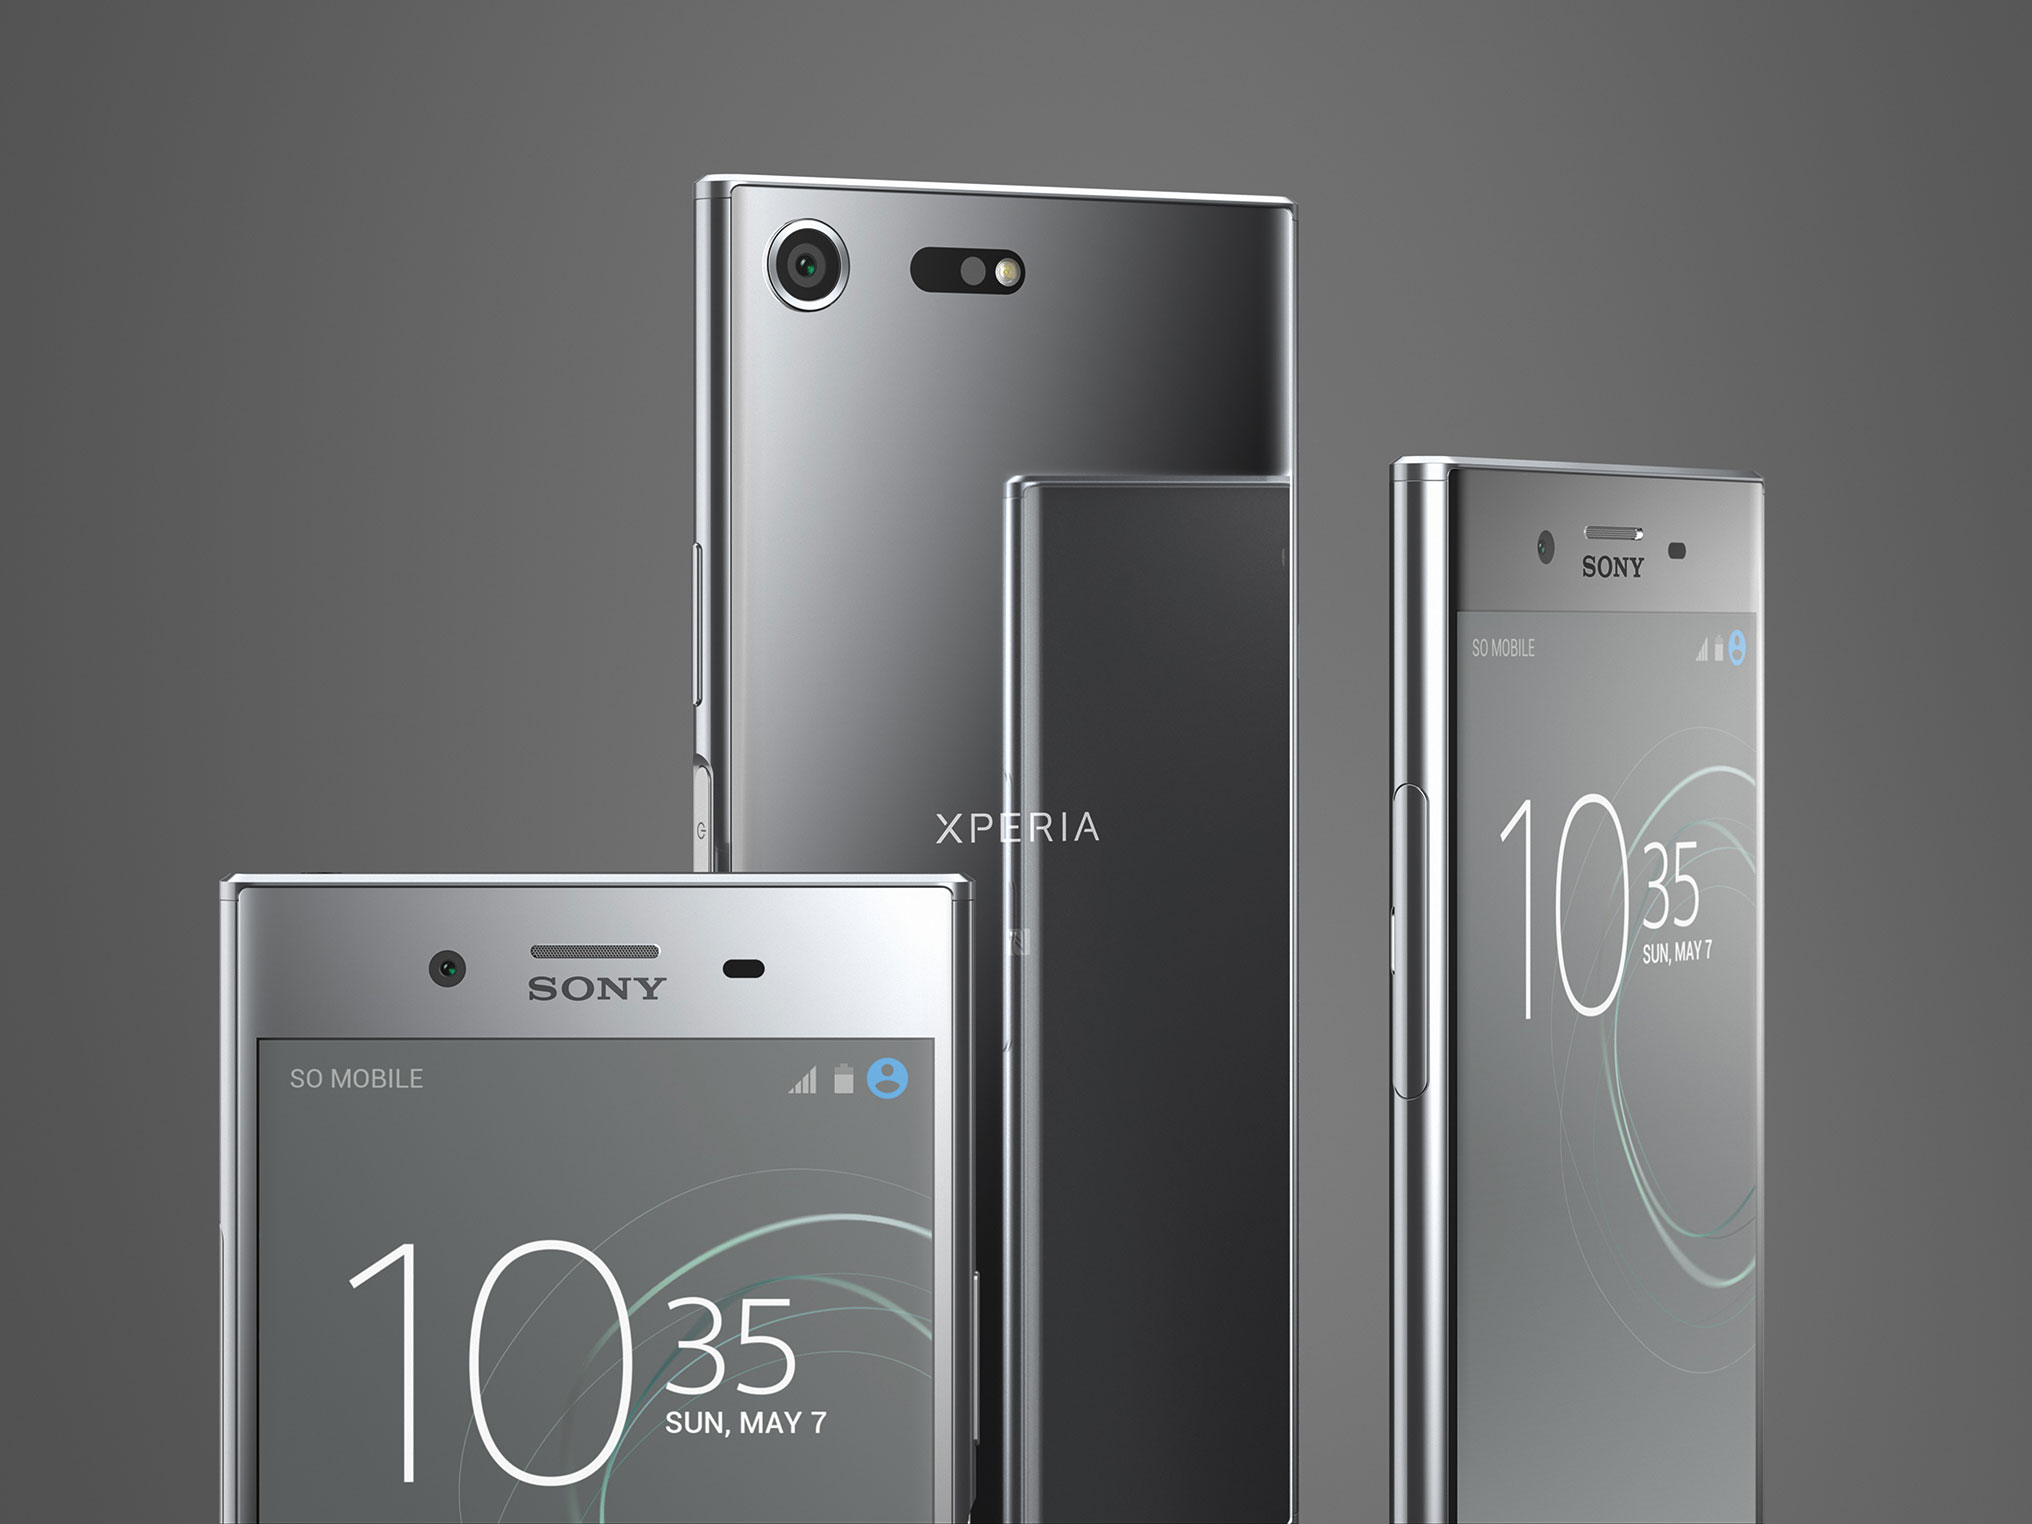 Clearing Downloads On Xperia: A Step-by-Step Guide